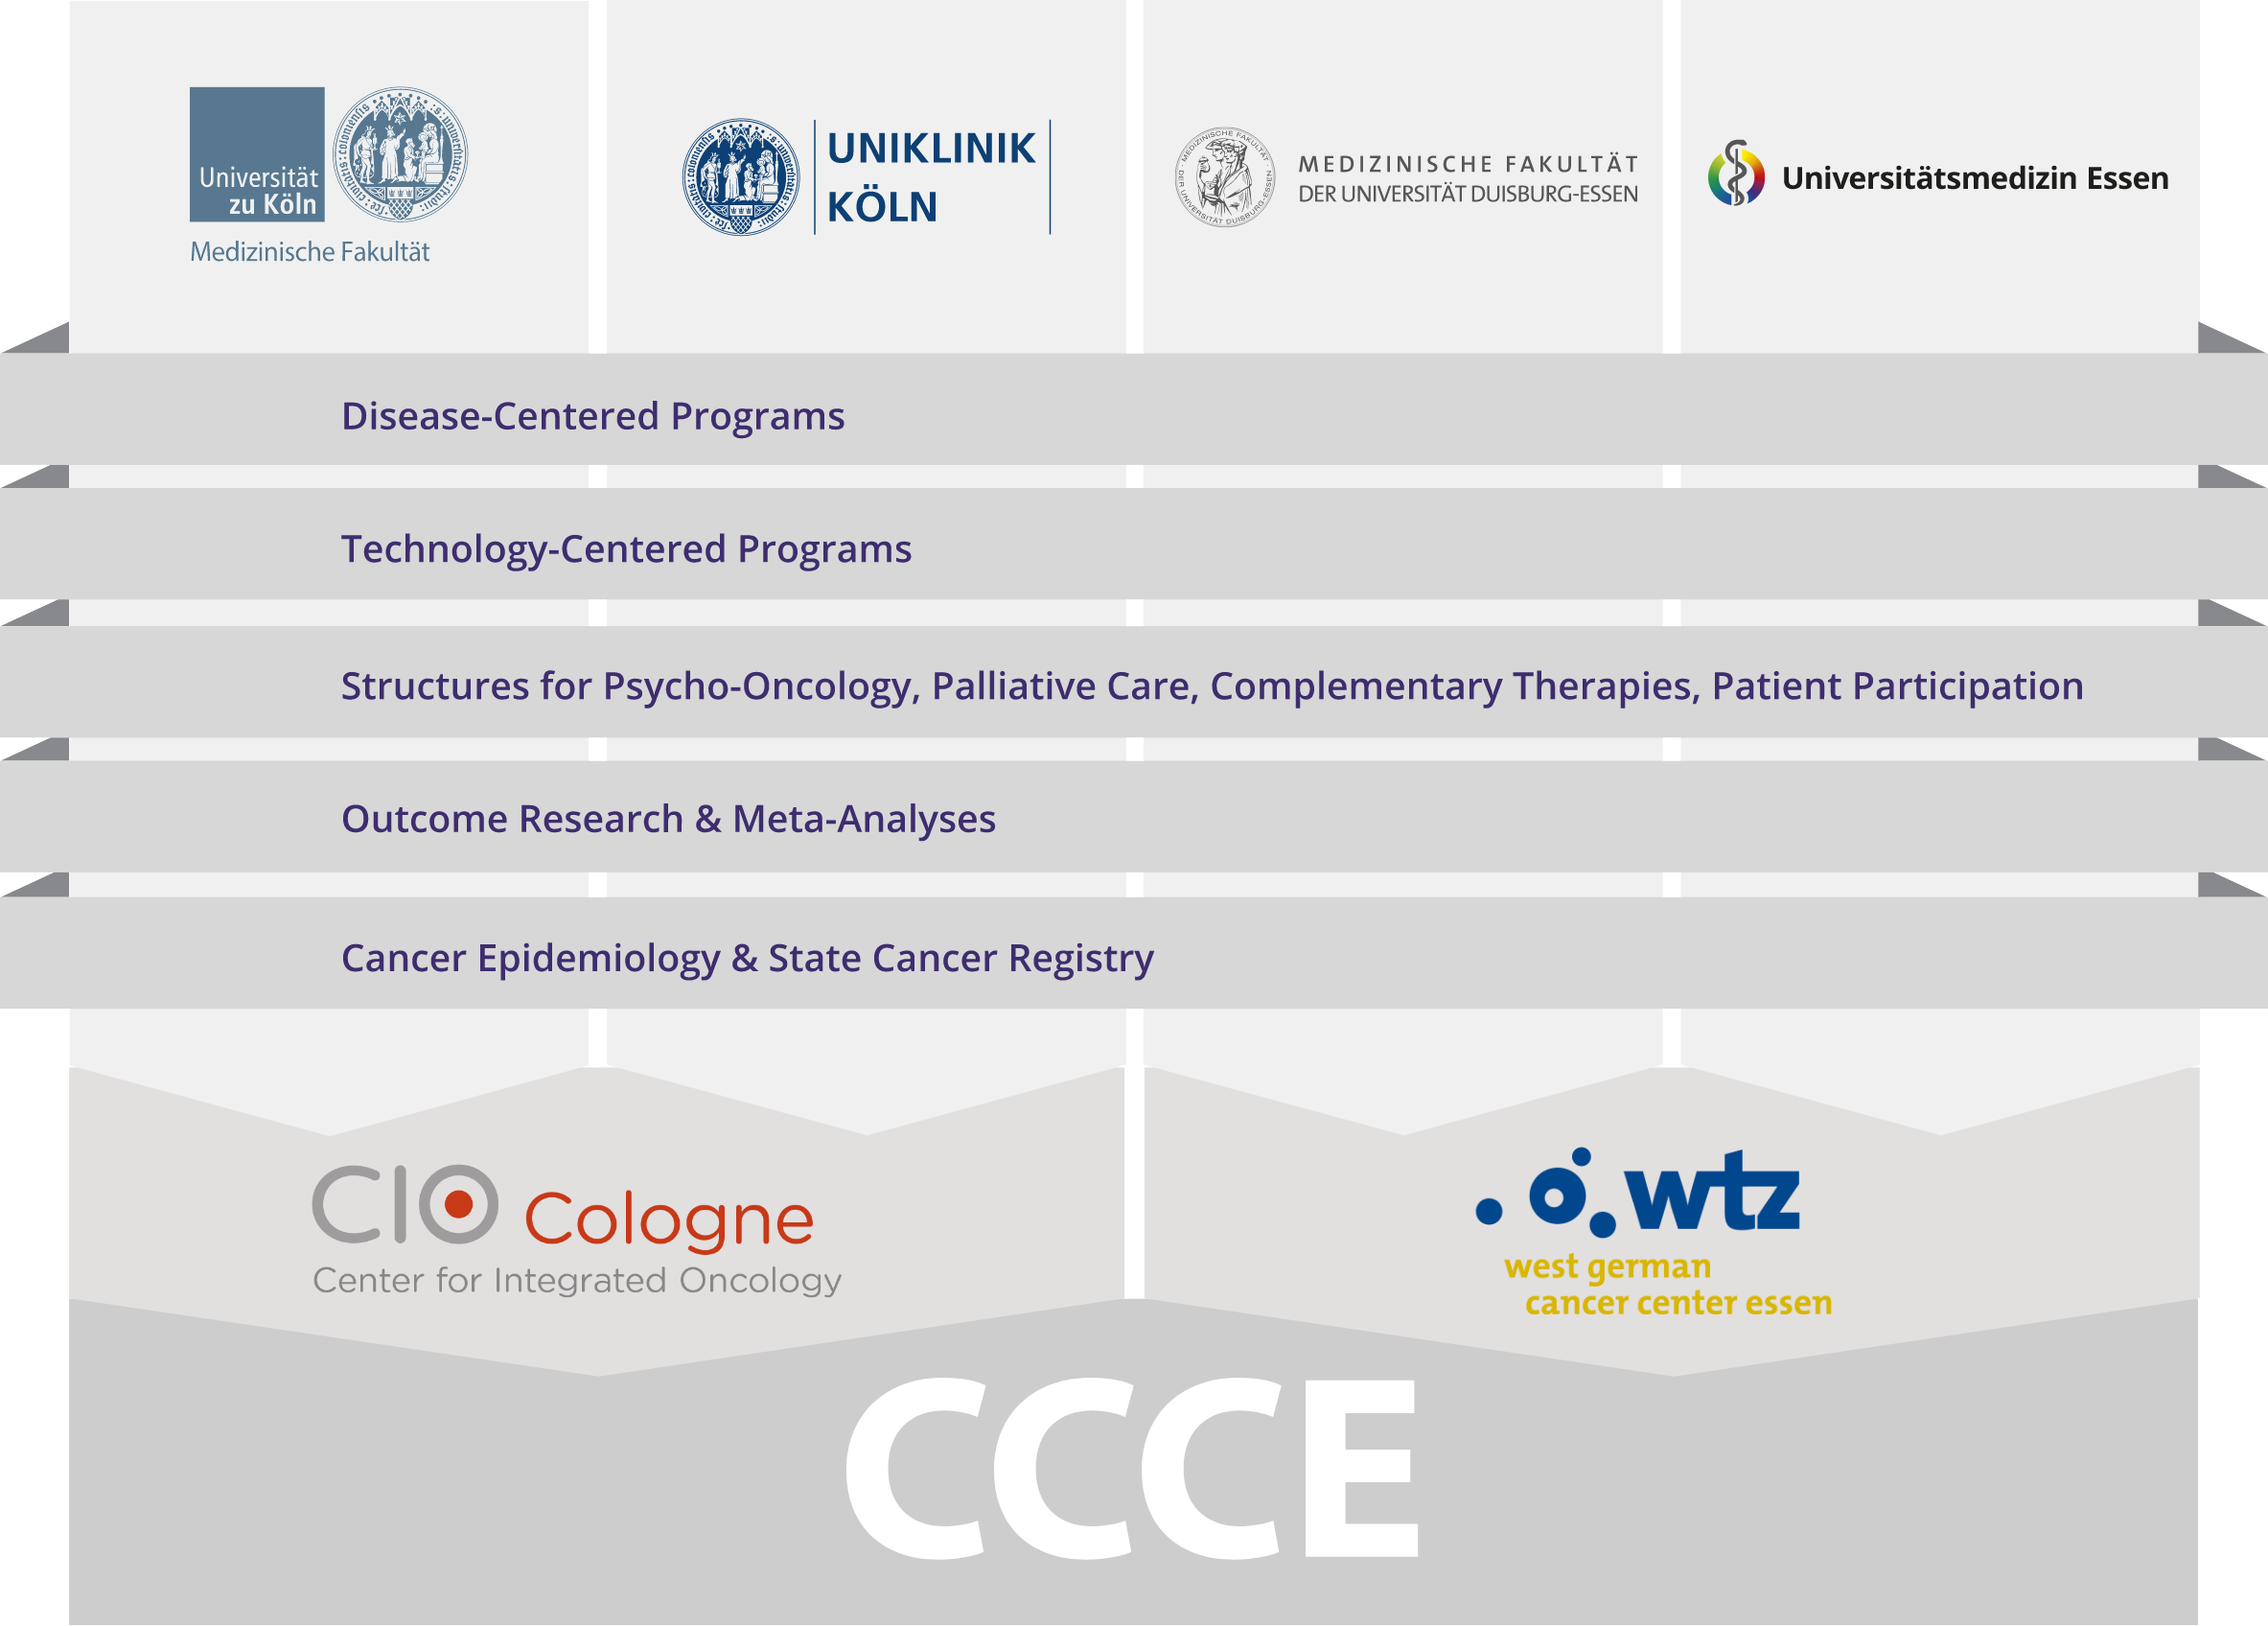 ccce structure